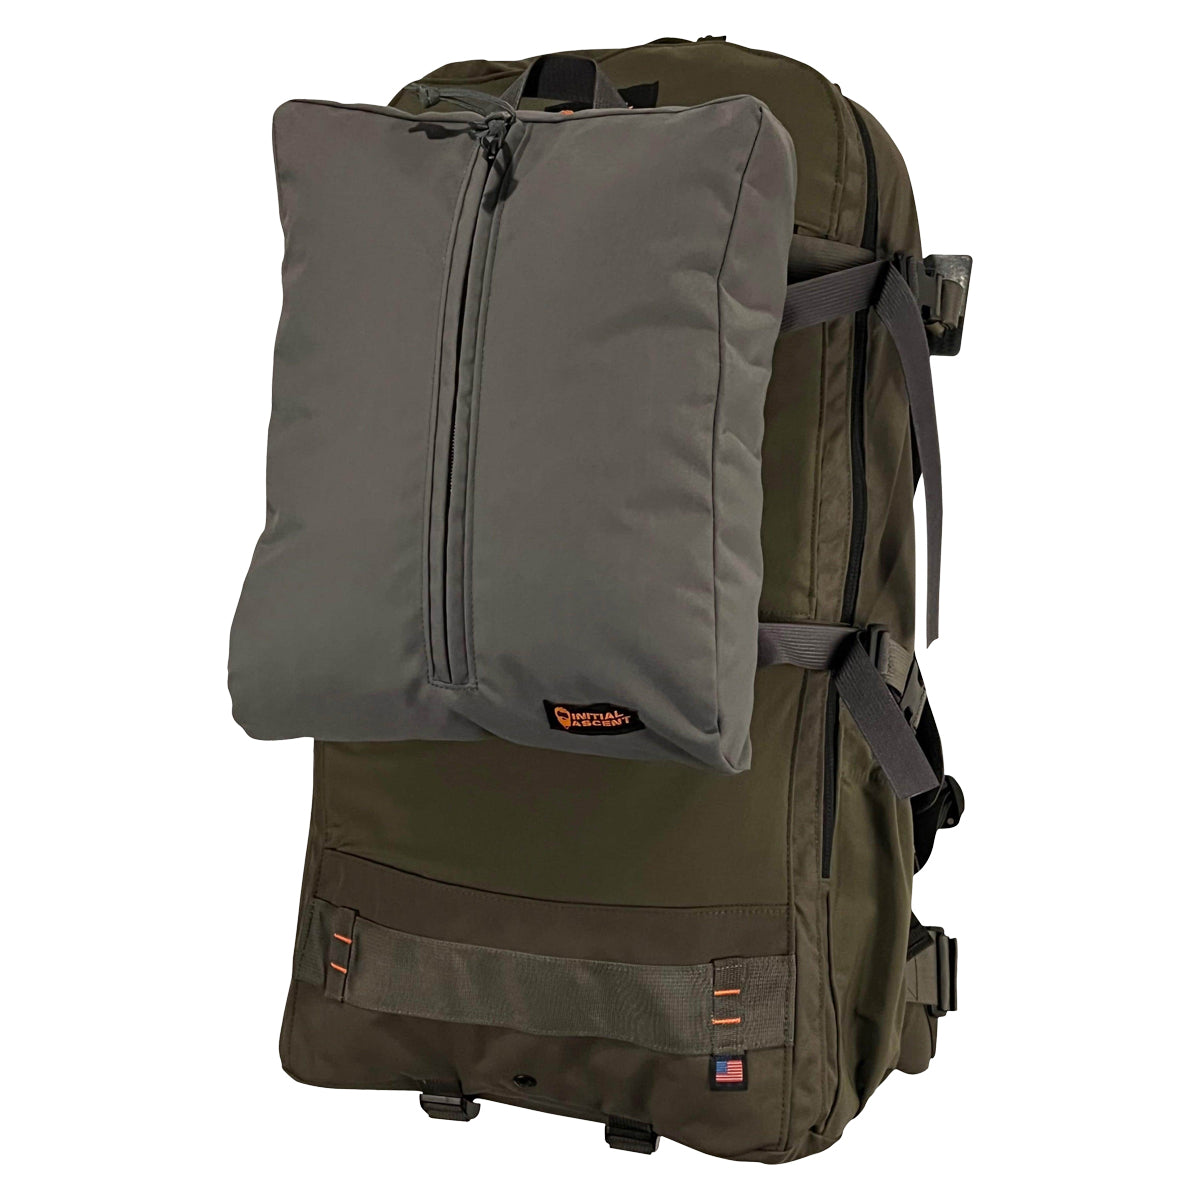 Initial Ascent Cub Accessory Bag in  by GOHUNT | Initial Ascent - GOHUNT Shop